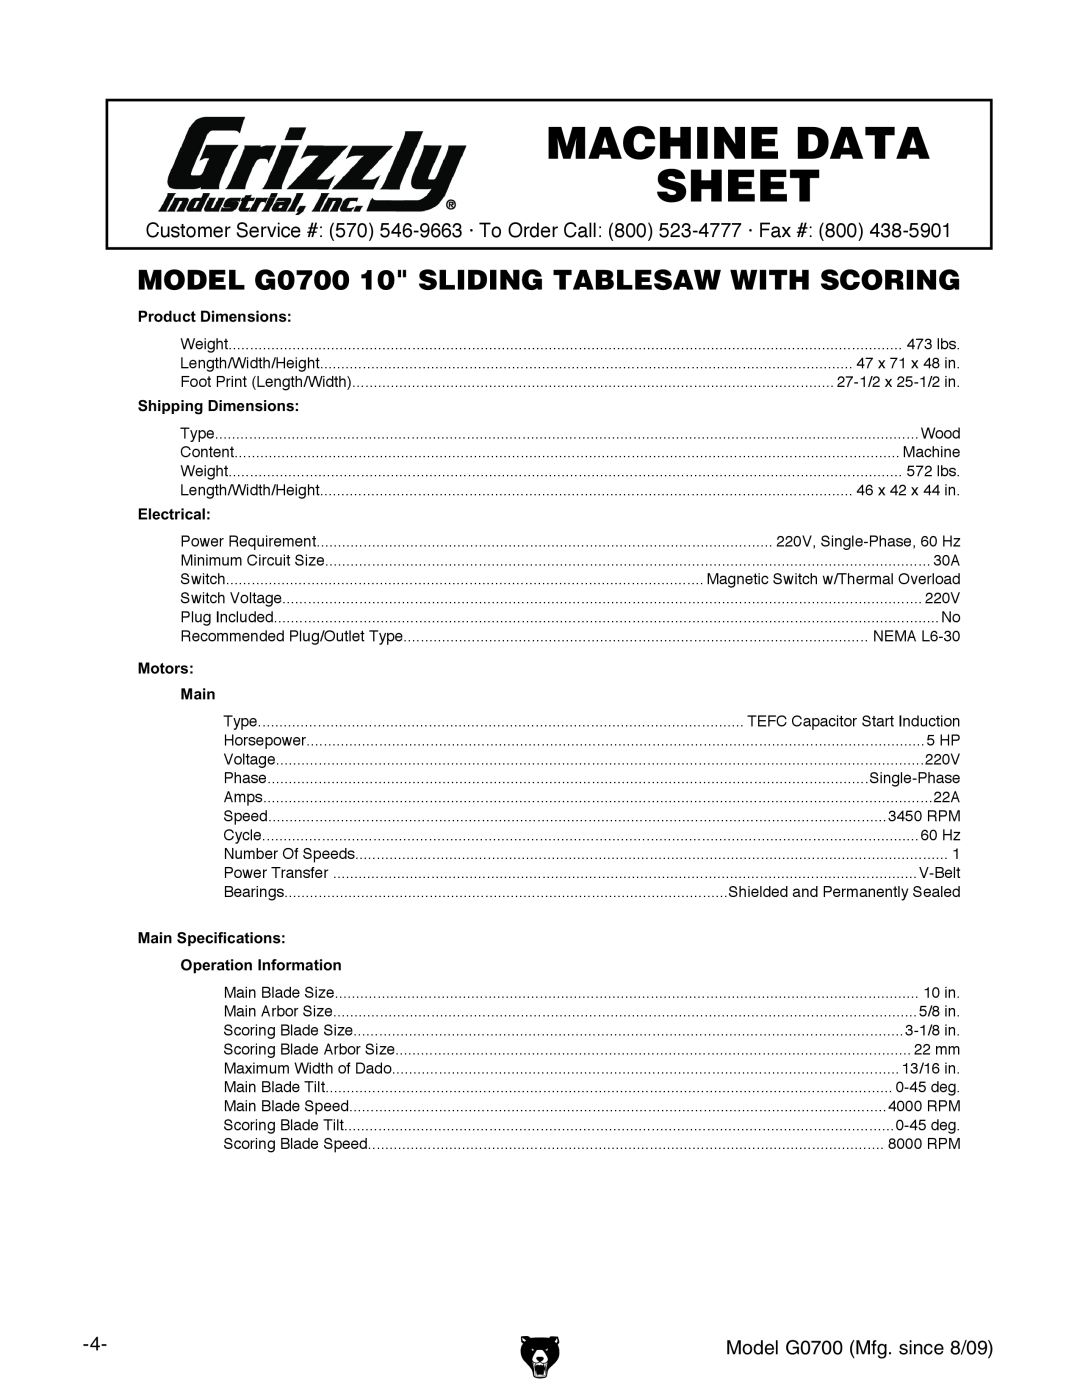 Grizzly Machine Data Sheet, MODEL G0700 10 SLIDING TABLESAW WITH SCORING, Product Dimensions, Shipping Dimensions, Main 